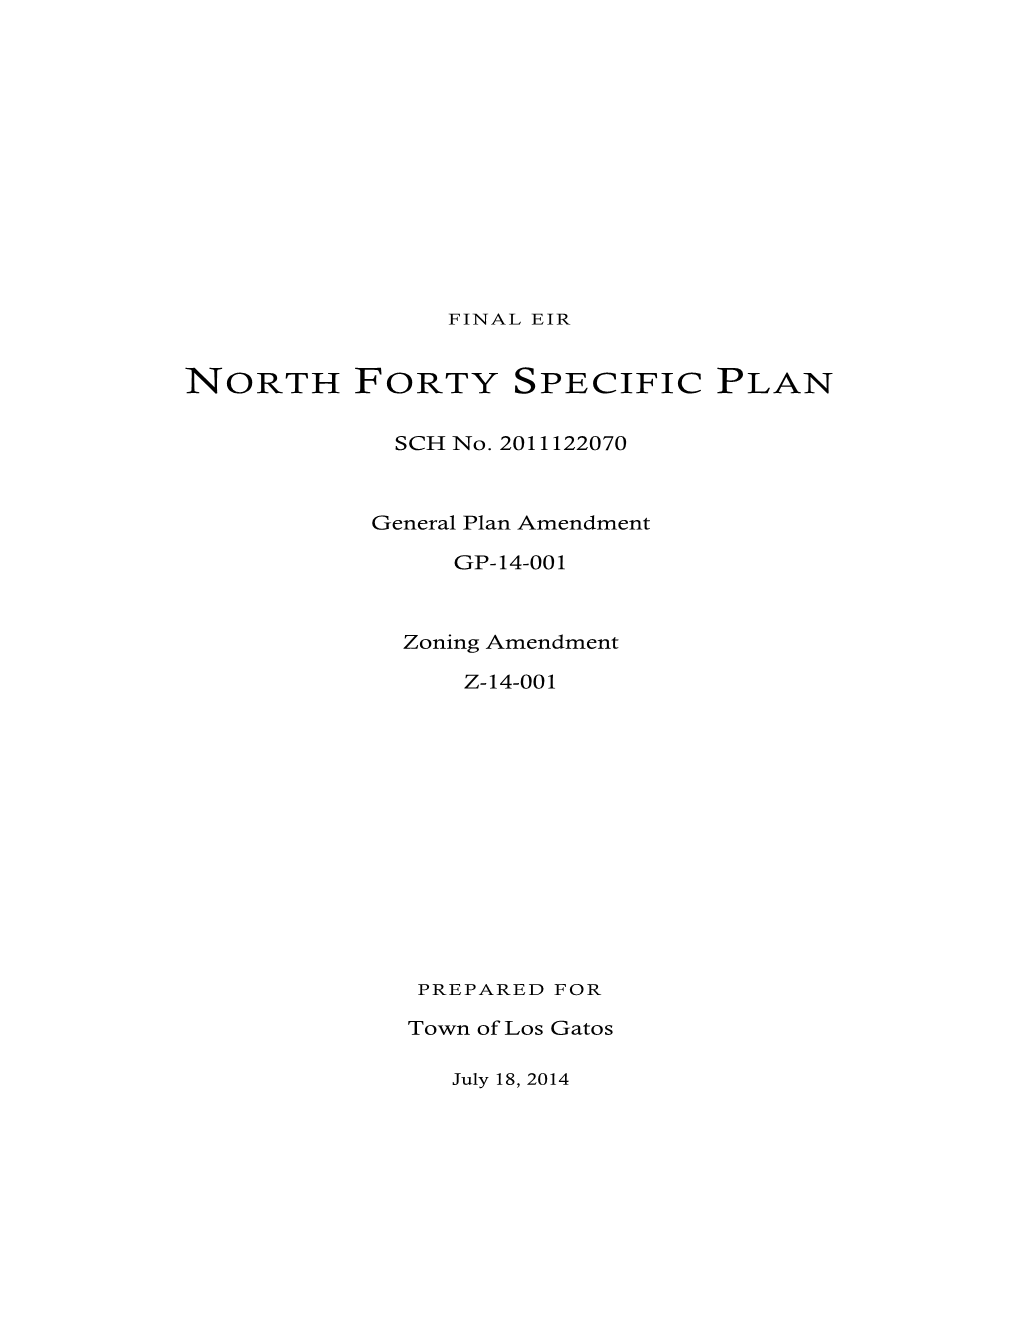 North Forty Specific Plan